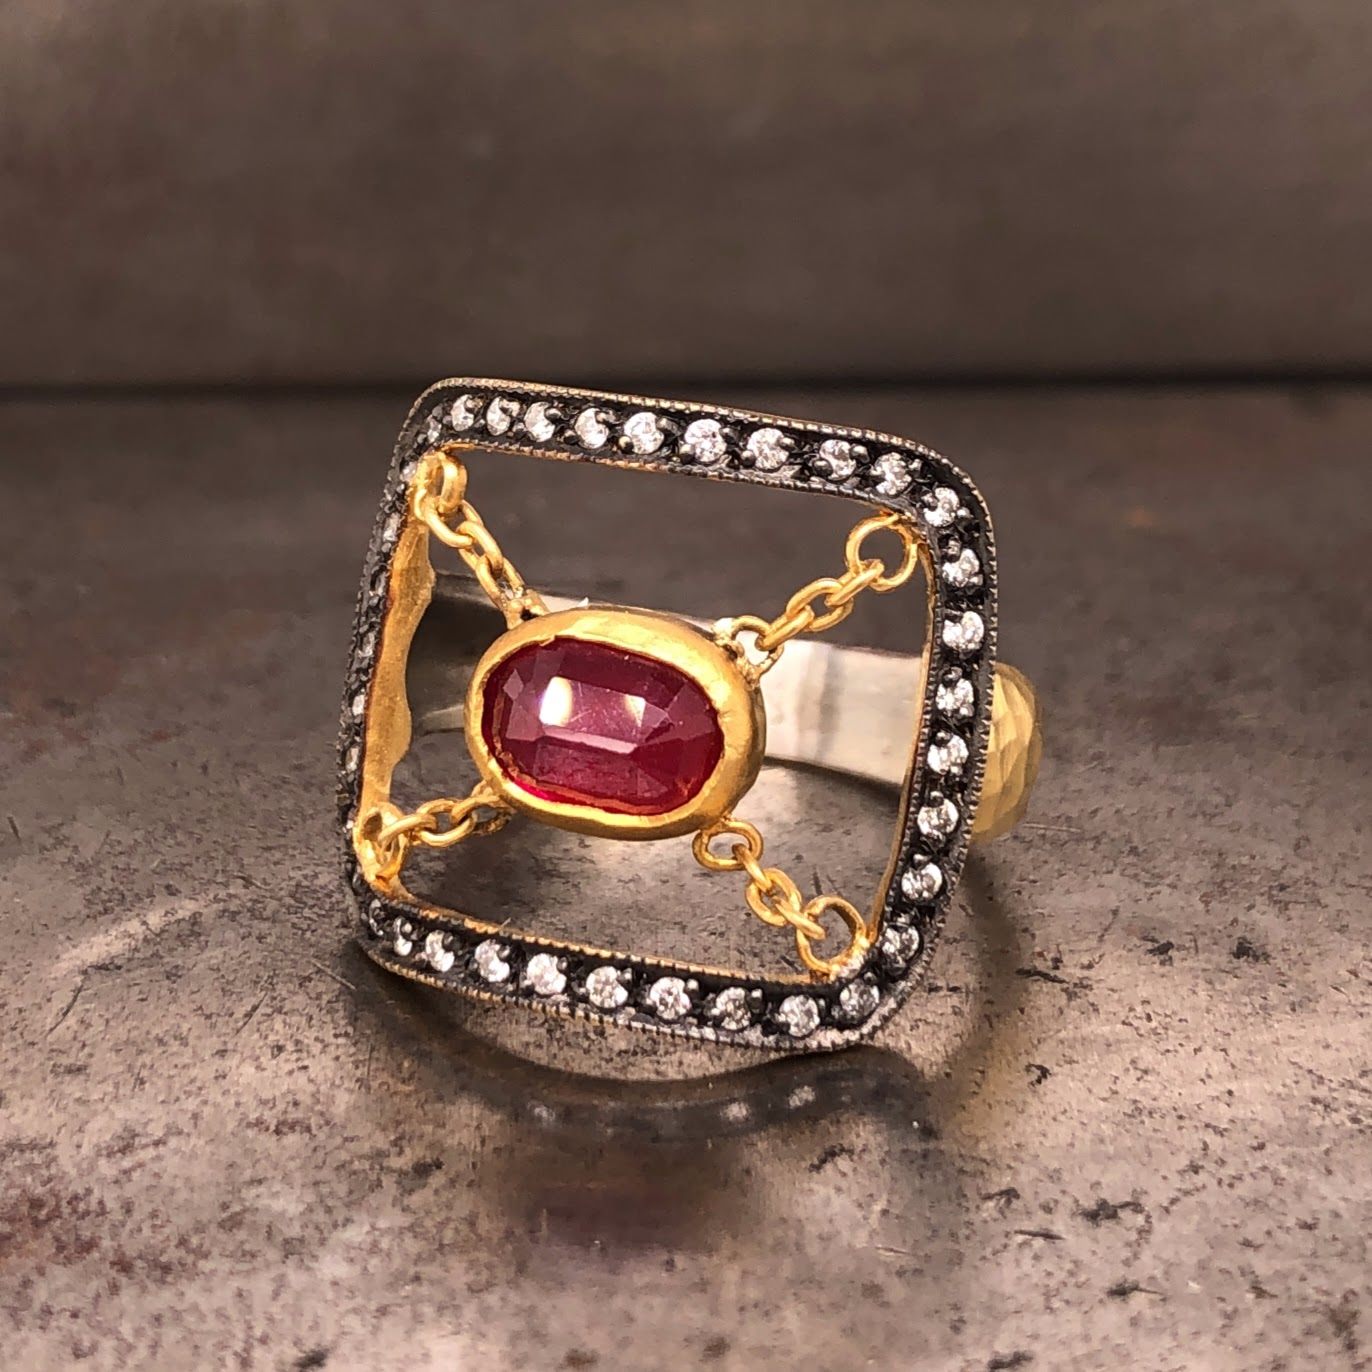 Angled view of ring laying down. There is an outline of a curved rectangle made from oxidized sterling silver that has a row of round diamonds set in it. On the inside of the rectangle, chain stretches from each corner to connect to the oval ruby that is bezel set in the center. This head lays on a gold and silver shank.